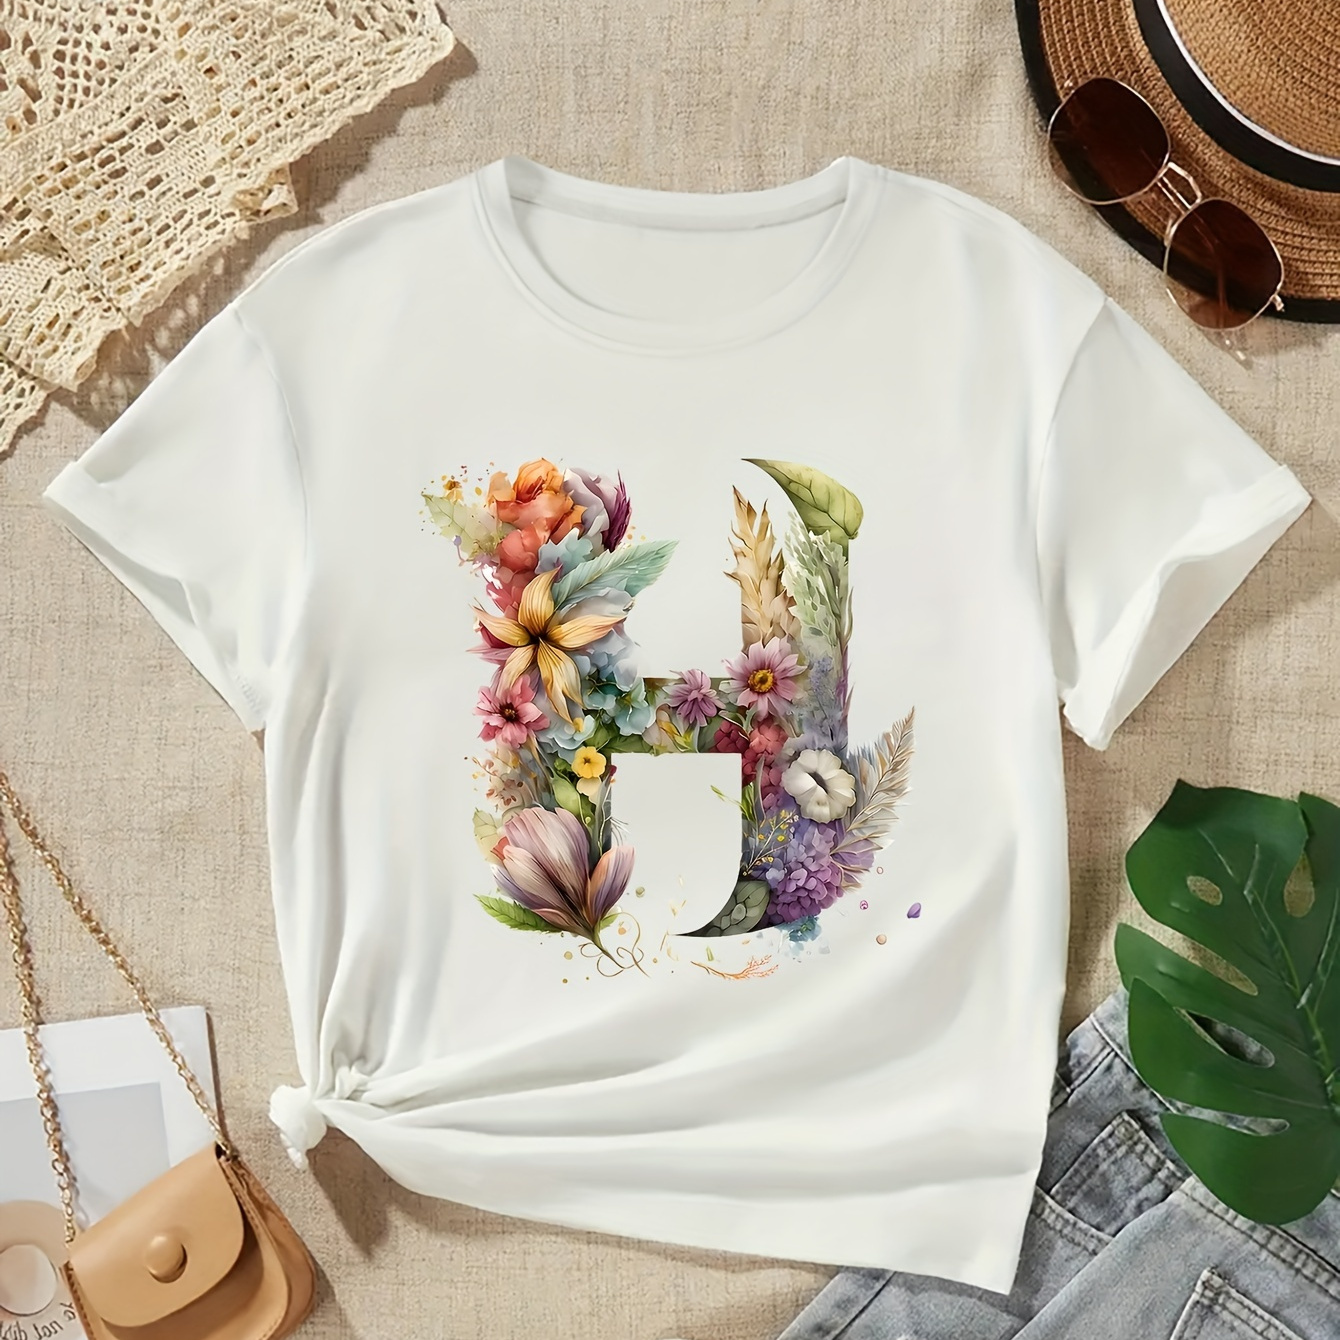 

Letter-h Print Creative T-shirts, Soft & Elastic Comfy Crew Neck Short Sleeve Tee, Girls' Daily Wear Top